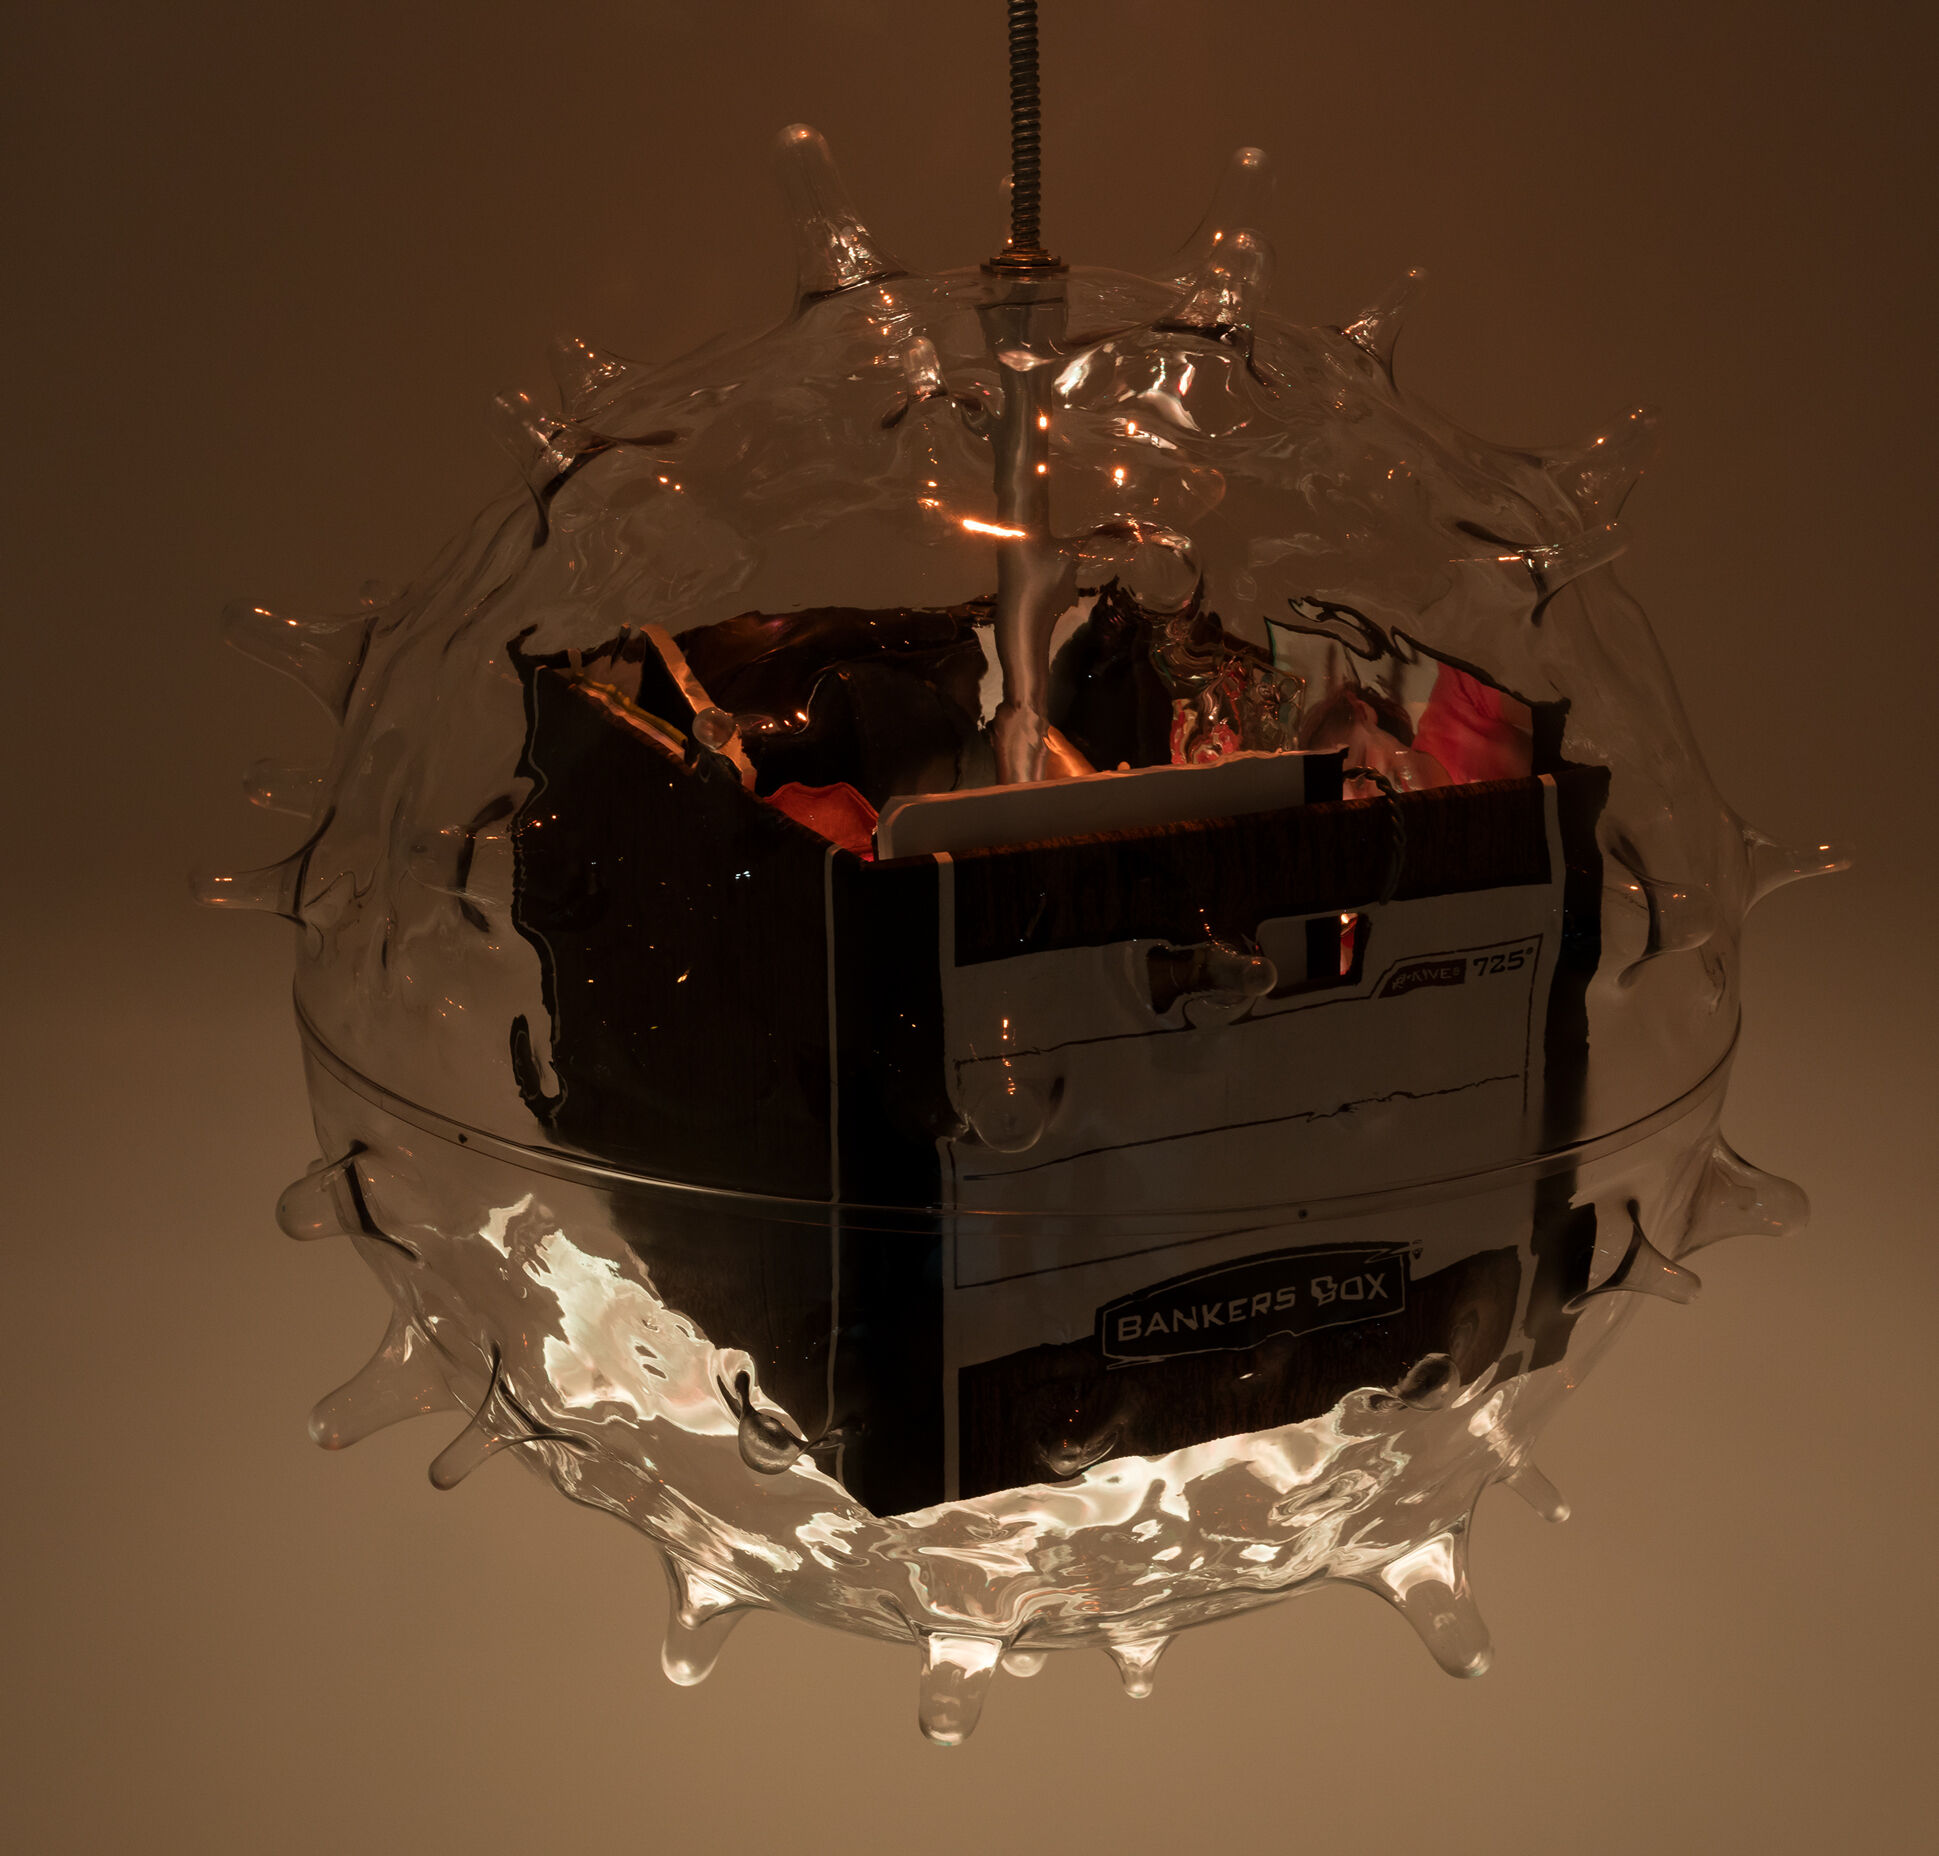 A file box suspended within the transparent shape of a virus. 